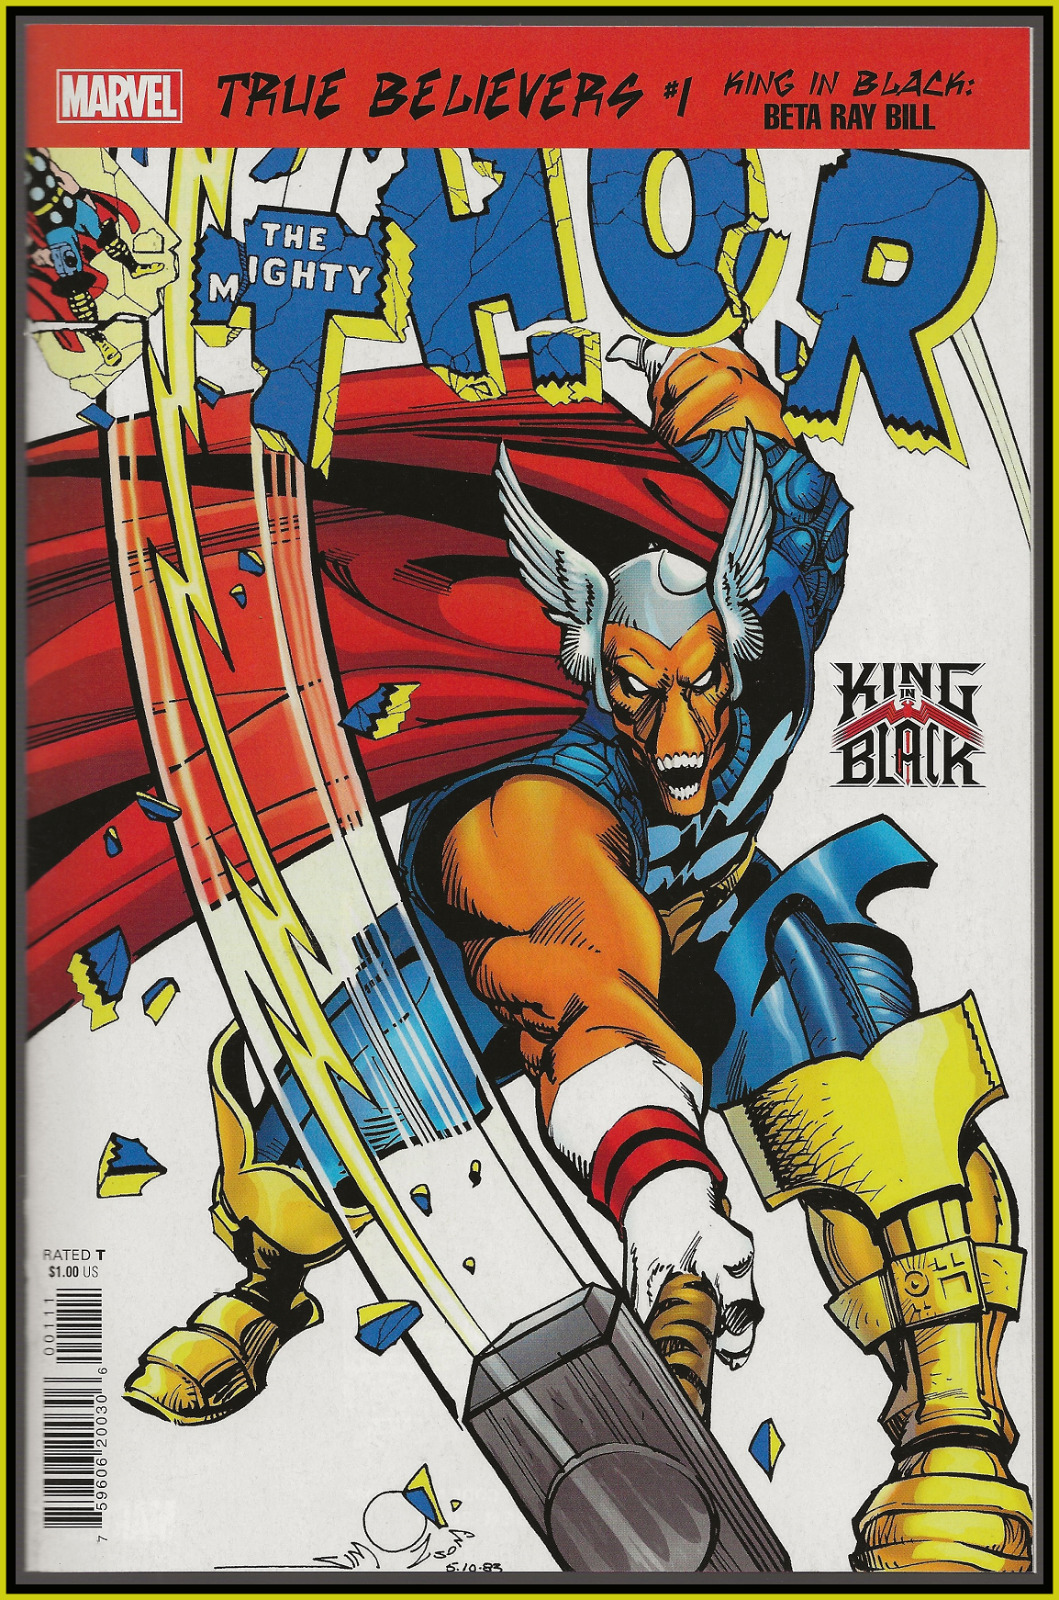 TRUE BELIEVERS BETA RAY BILL #1 REPRINTS THOR #337 1ST APPEARANCE MARVEL 9.4 NM